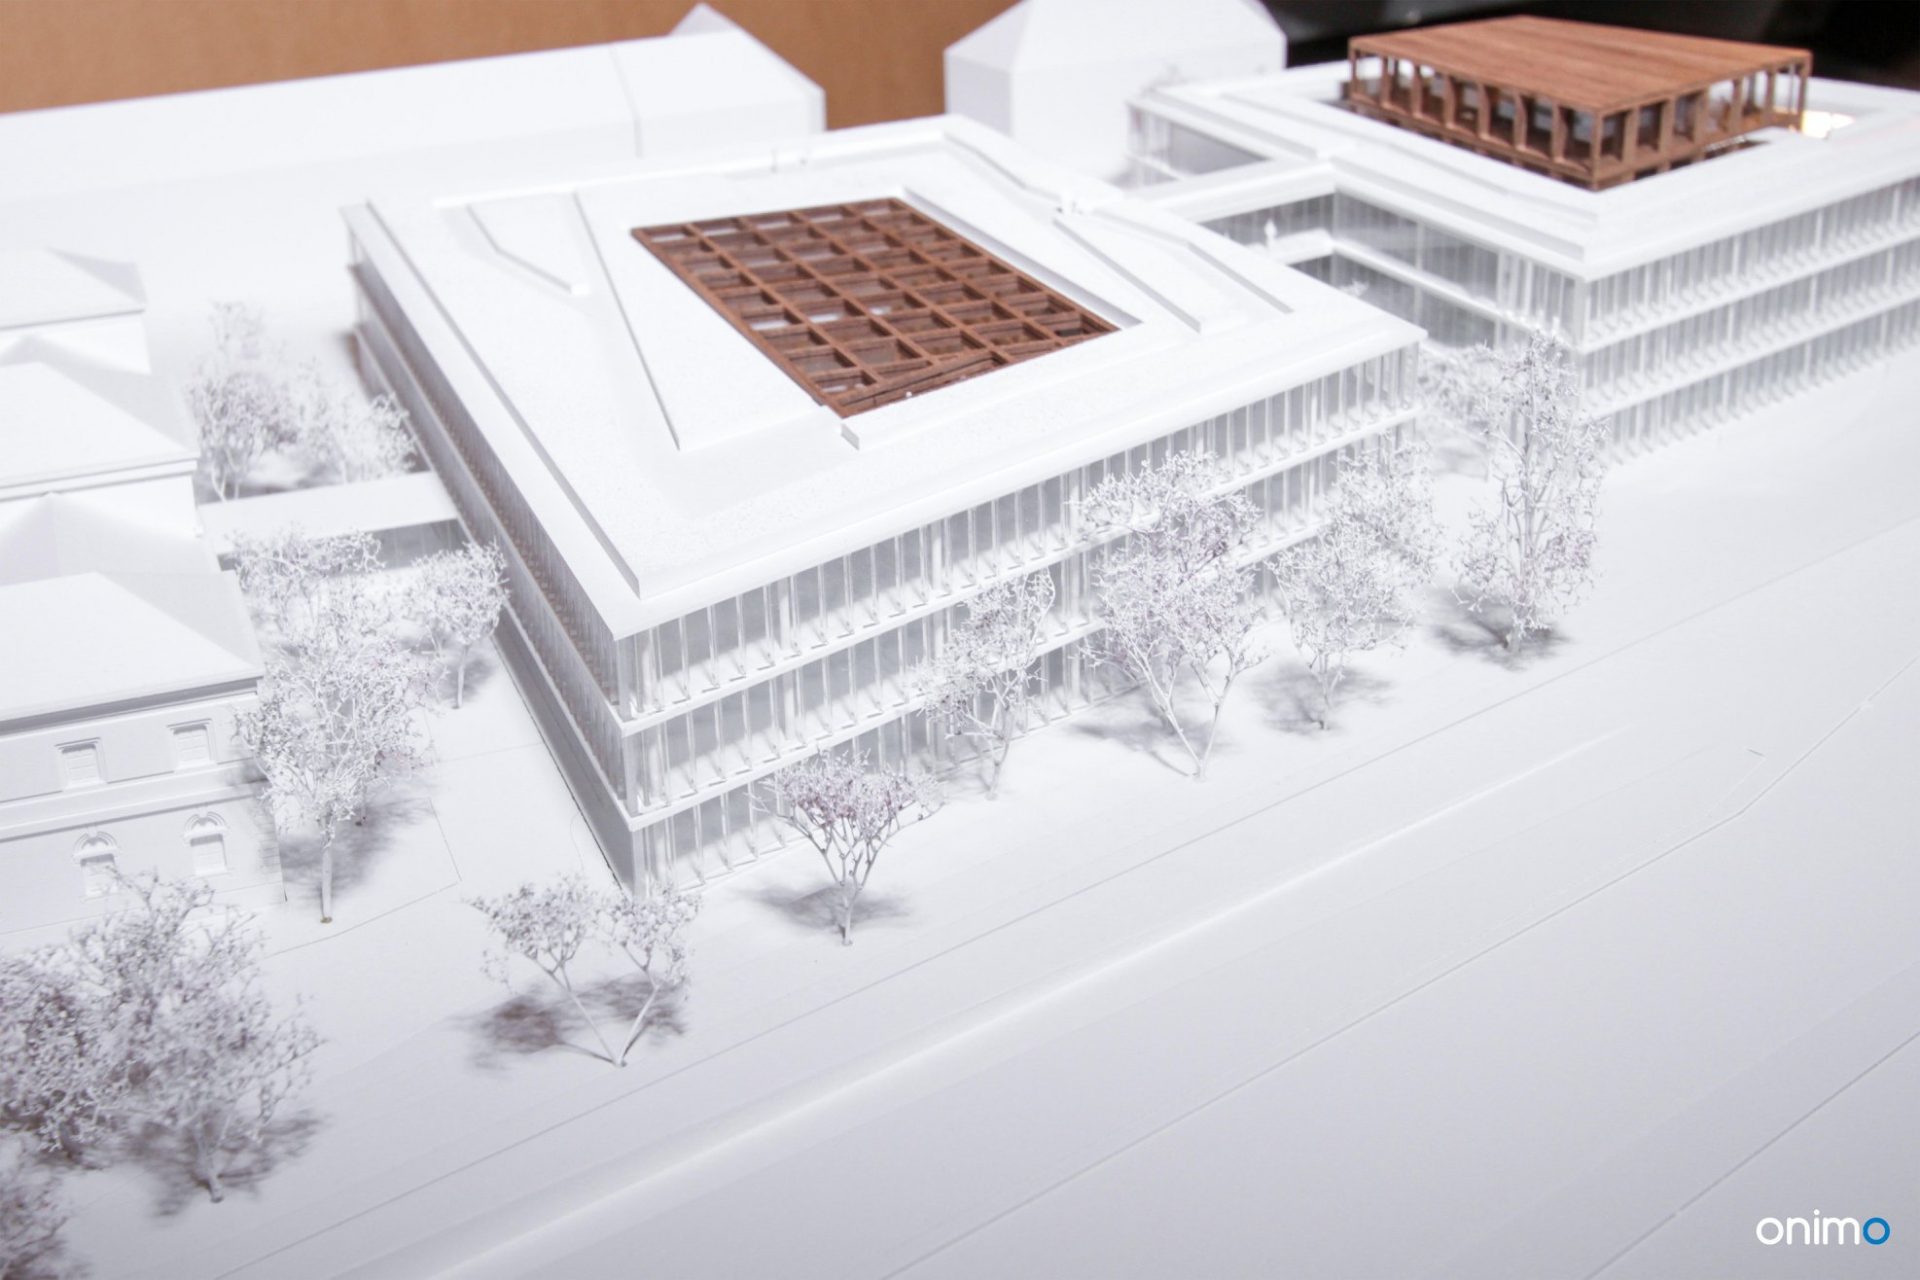 Didactic building of the University of Warsaw, BDR Architekci, ONIMO, best architectural models, best buildings models